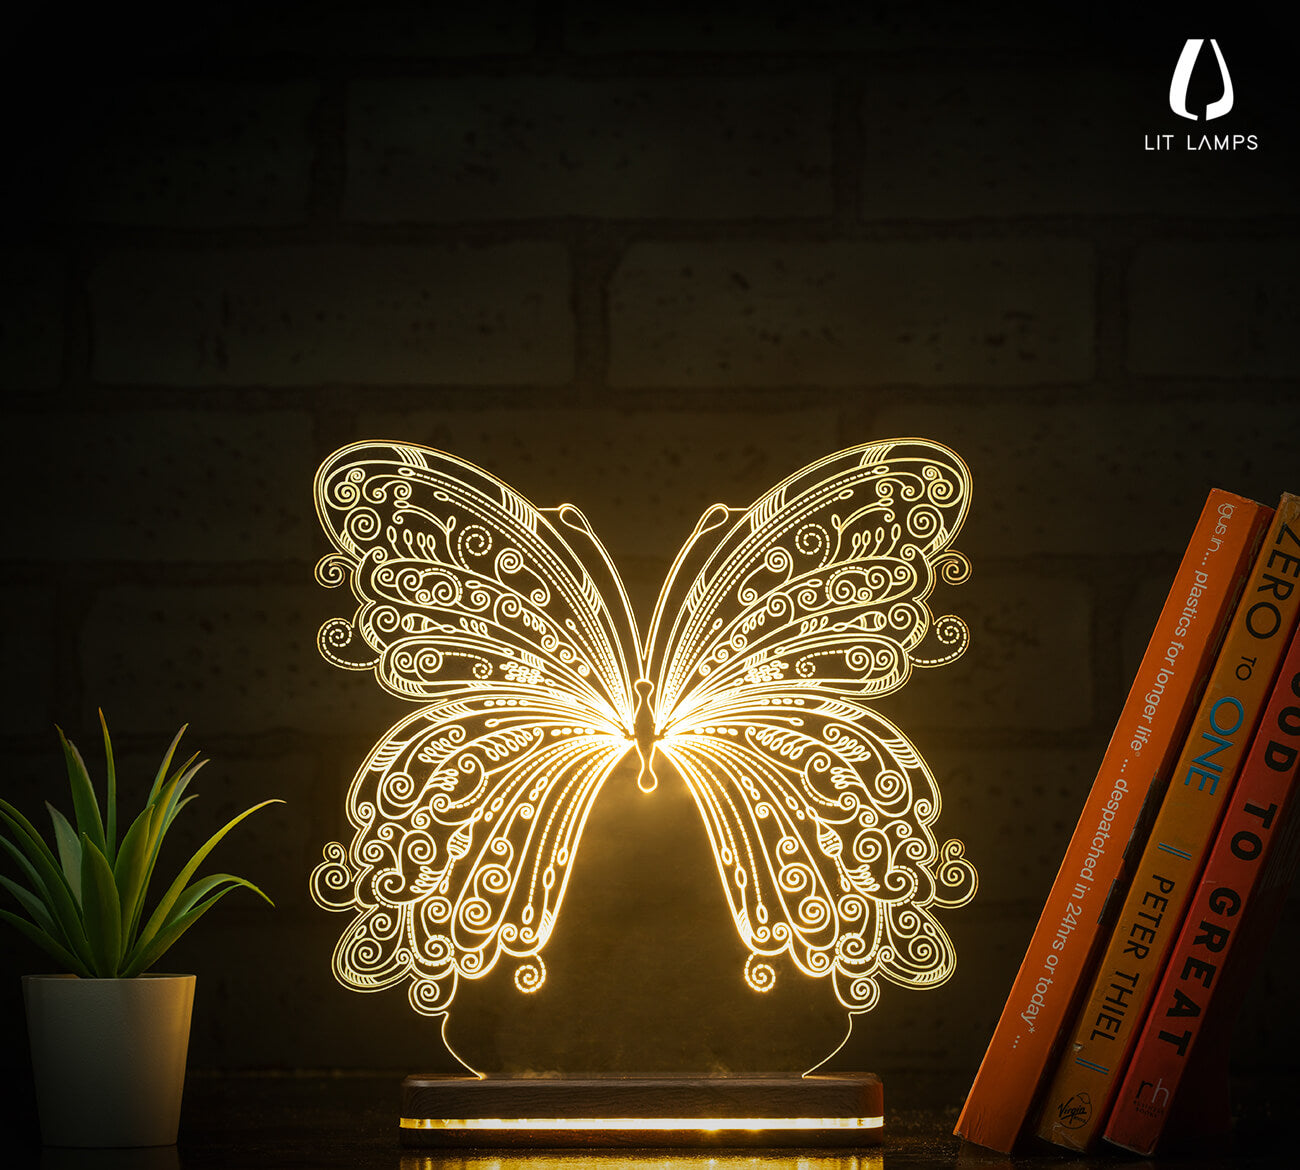 Butterfly Modern Home Decor Aesthetic 3D Illusion Lamp by LIT Lamps - LIT Lamps - Butterfly 3D LED Lamp-3d Lamps